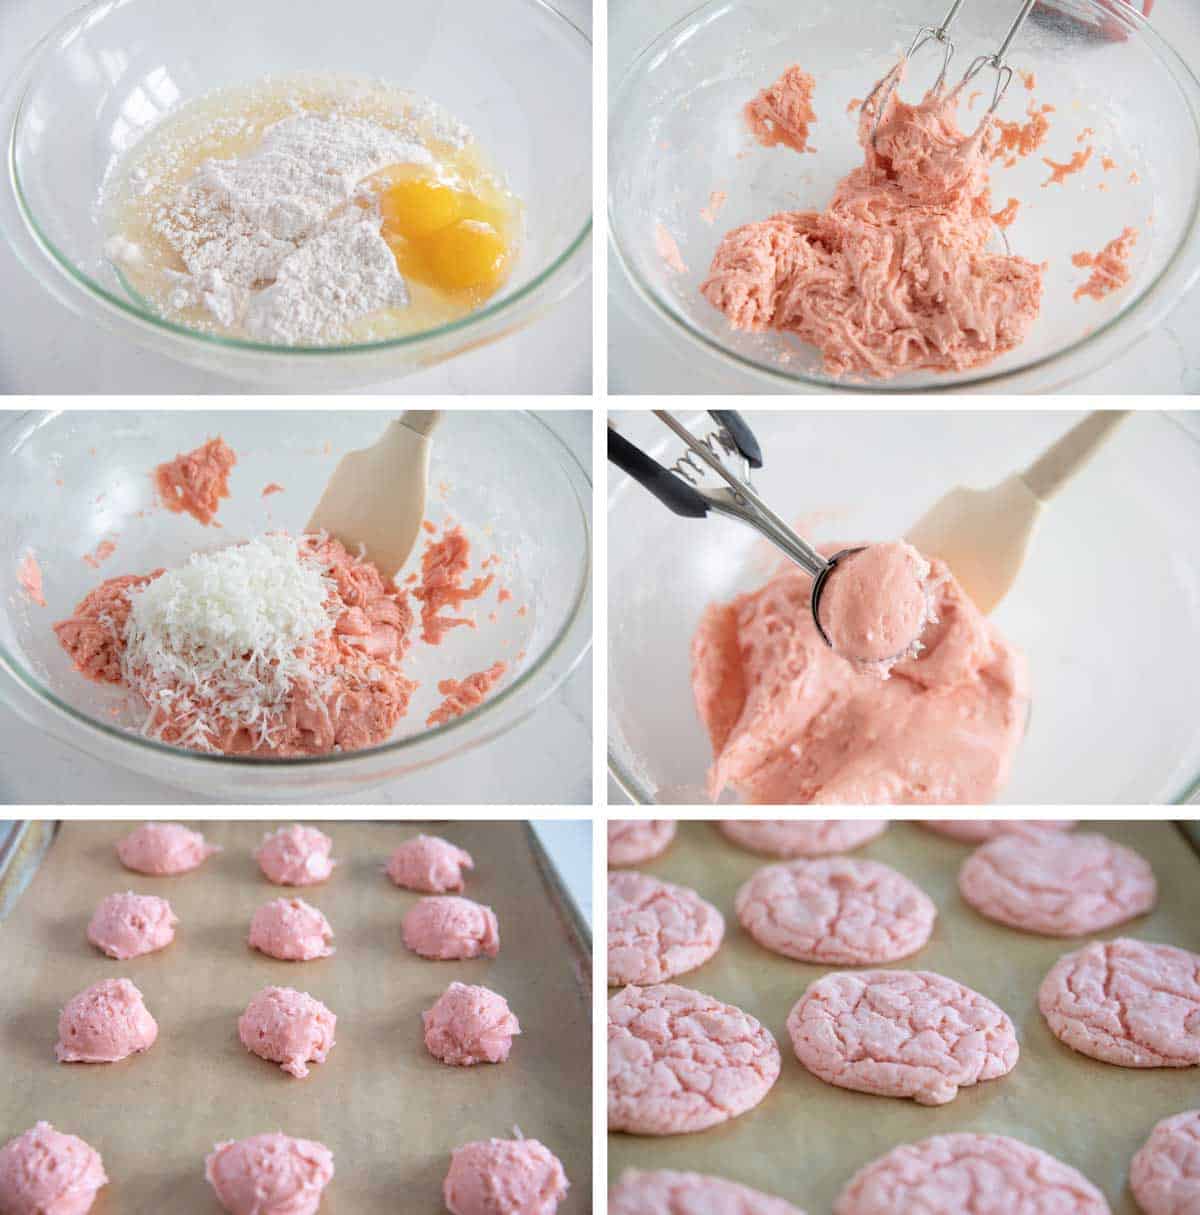 Steps to make cake mix cookies with 4 ingredients.